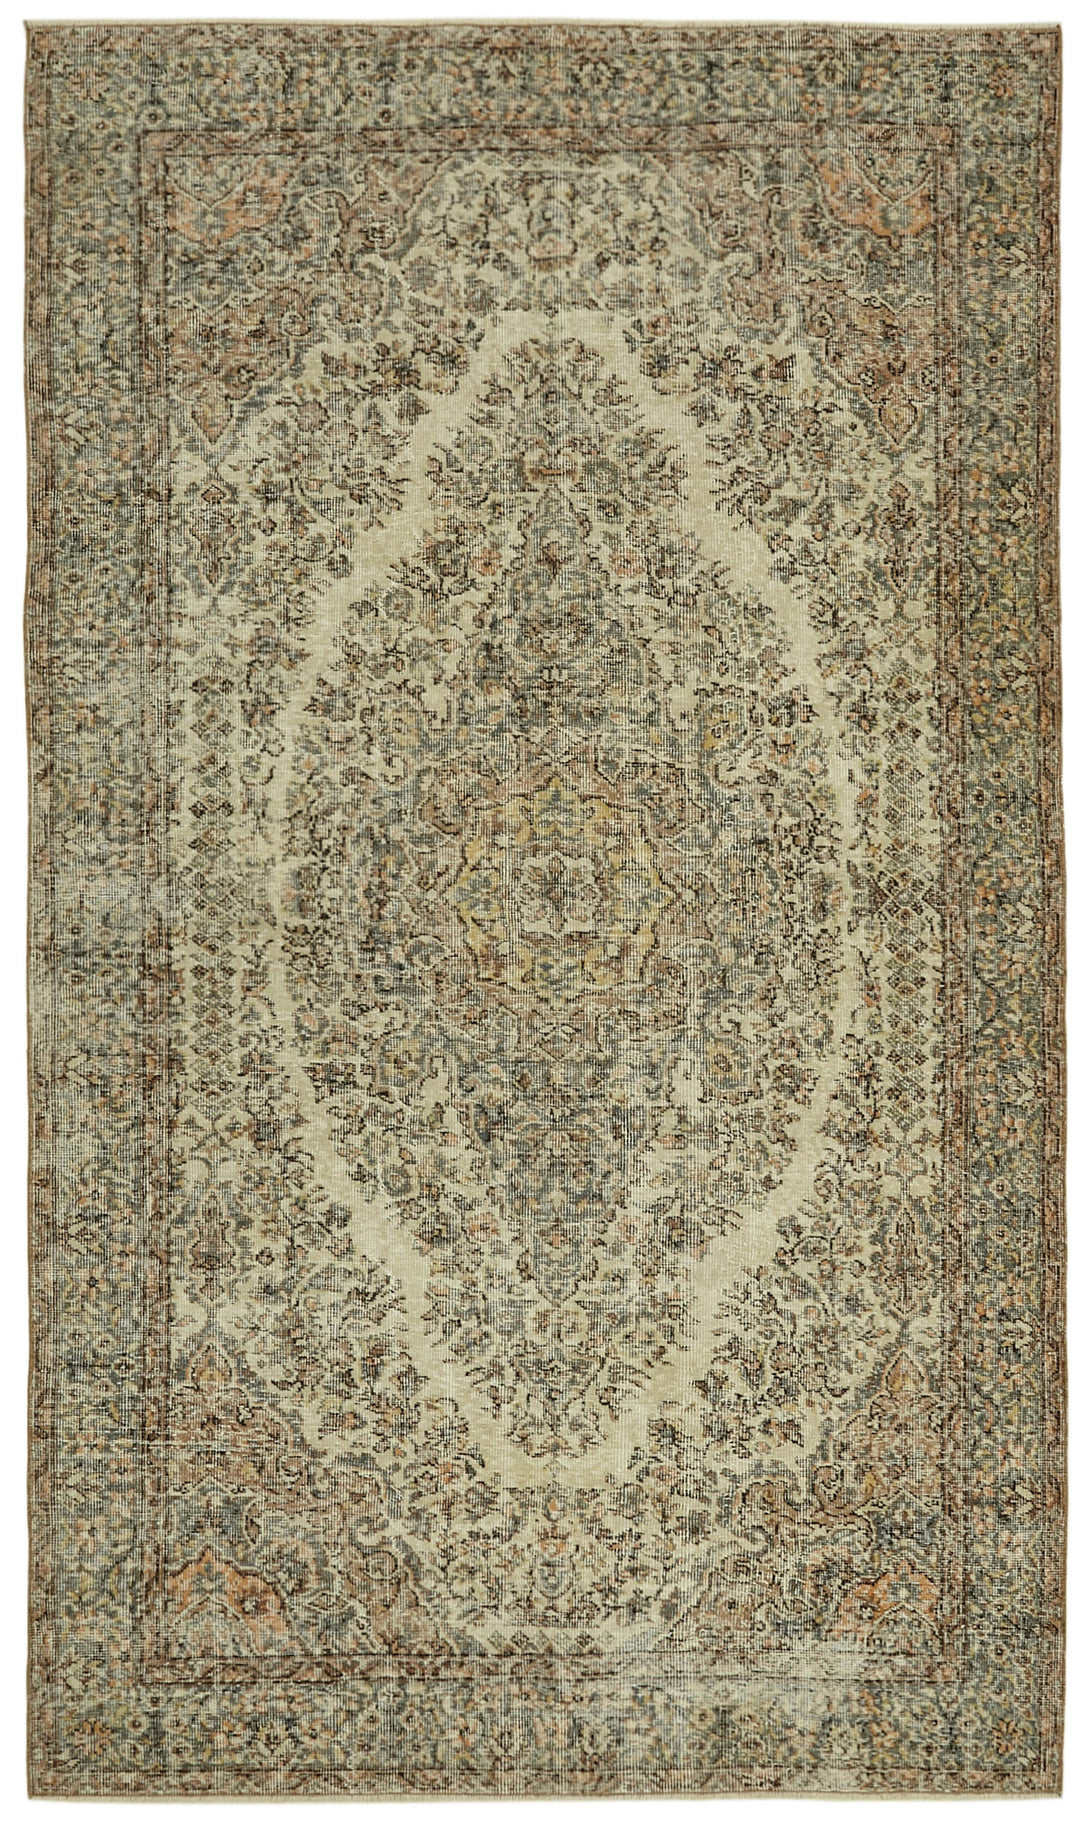 Handmade White Wash Area Rug > Design# OL-AC-41580 > Size: 5'-6" x 9'-2", Carpet Culture Rugs, Handmade Rugs, NYC Rugs, New Rugs, Shop Rugs, Rug Store, Outlet Rugs, SoHo Rugs, Rugs in USA